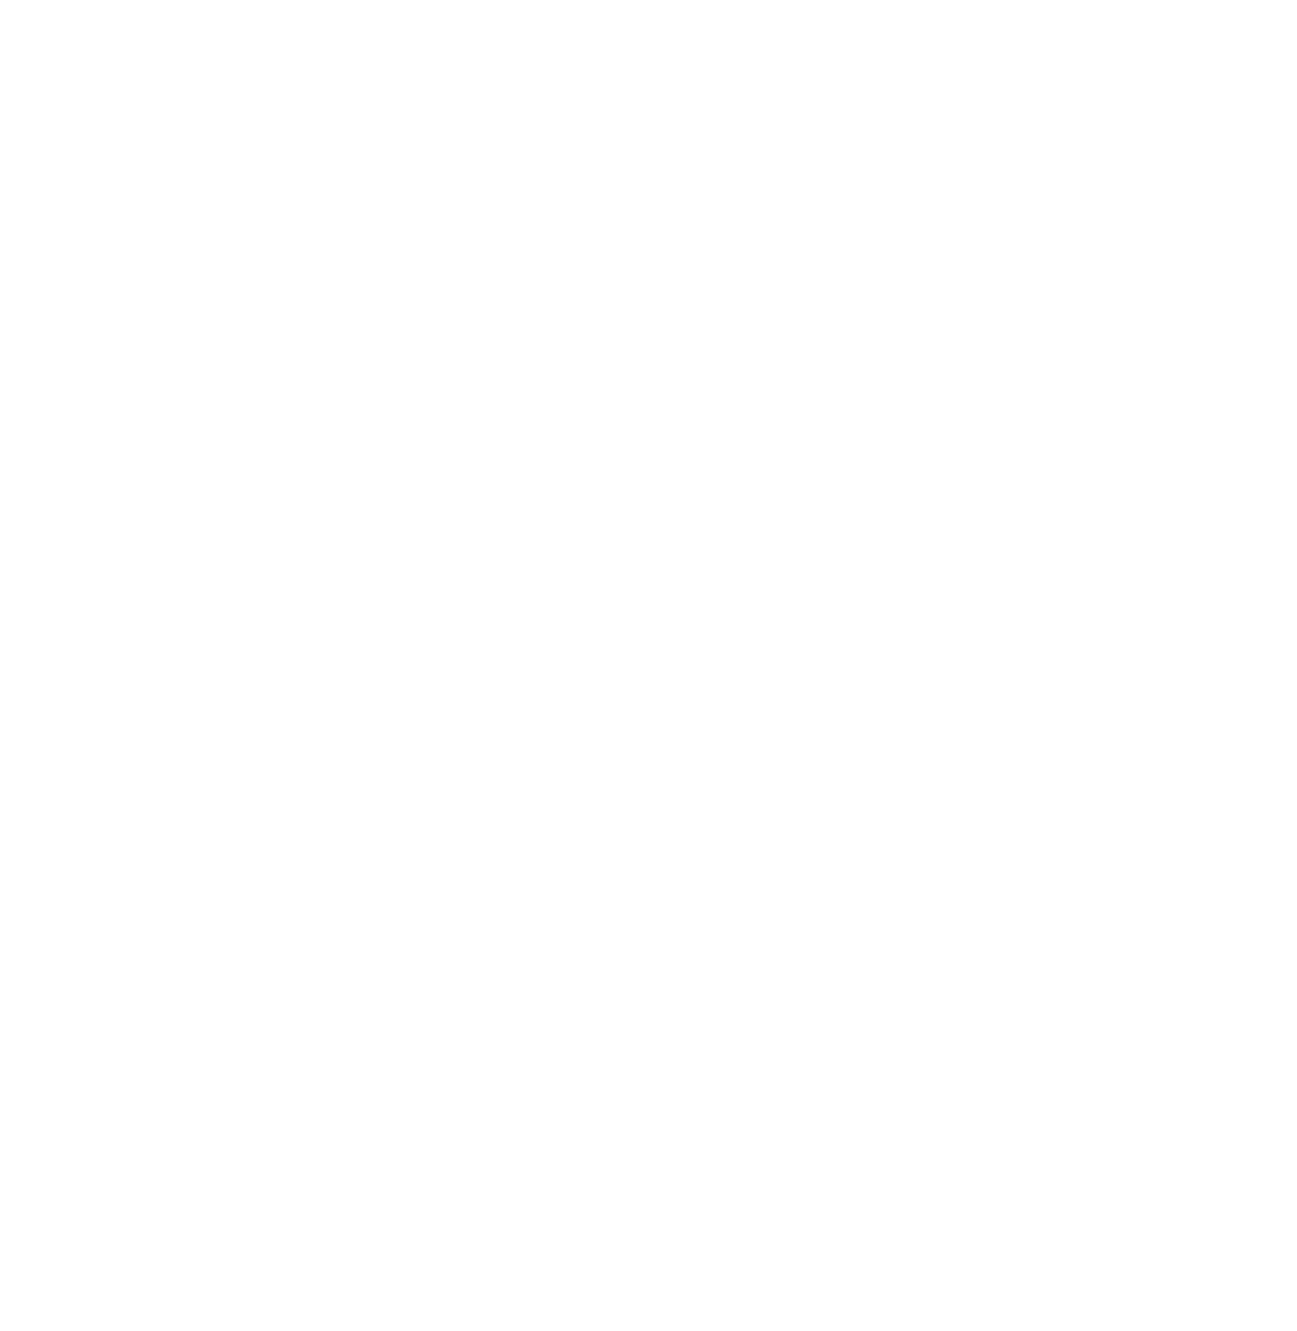 Meet New Hedera Governing Council Board Member, Shyam Nagarajan of - Hedera Hashgraph - Gossip About Gossip Podcast